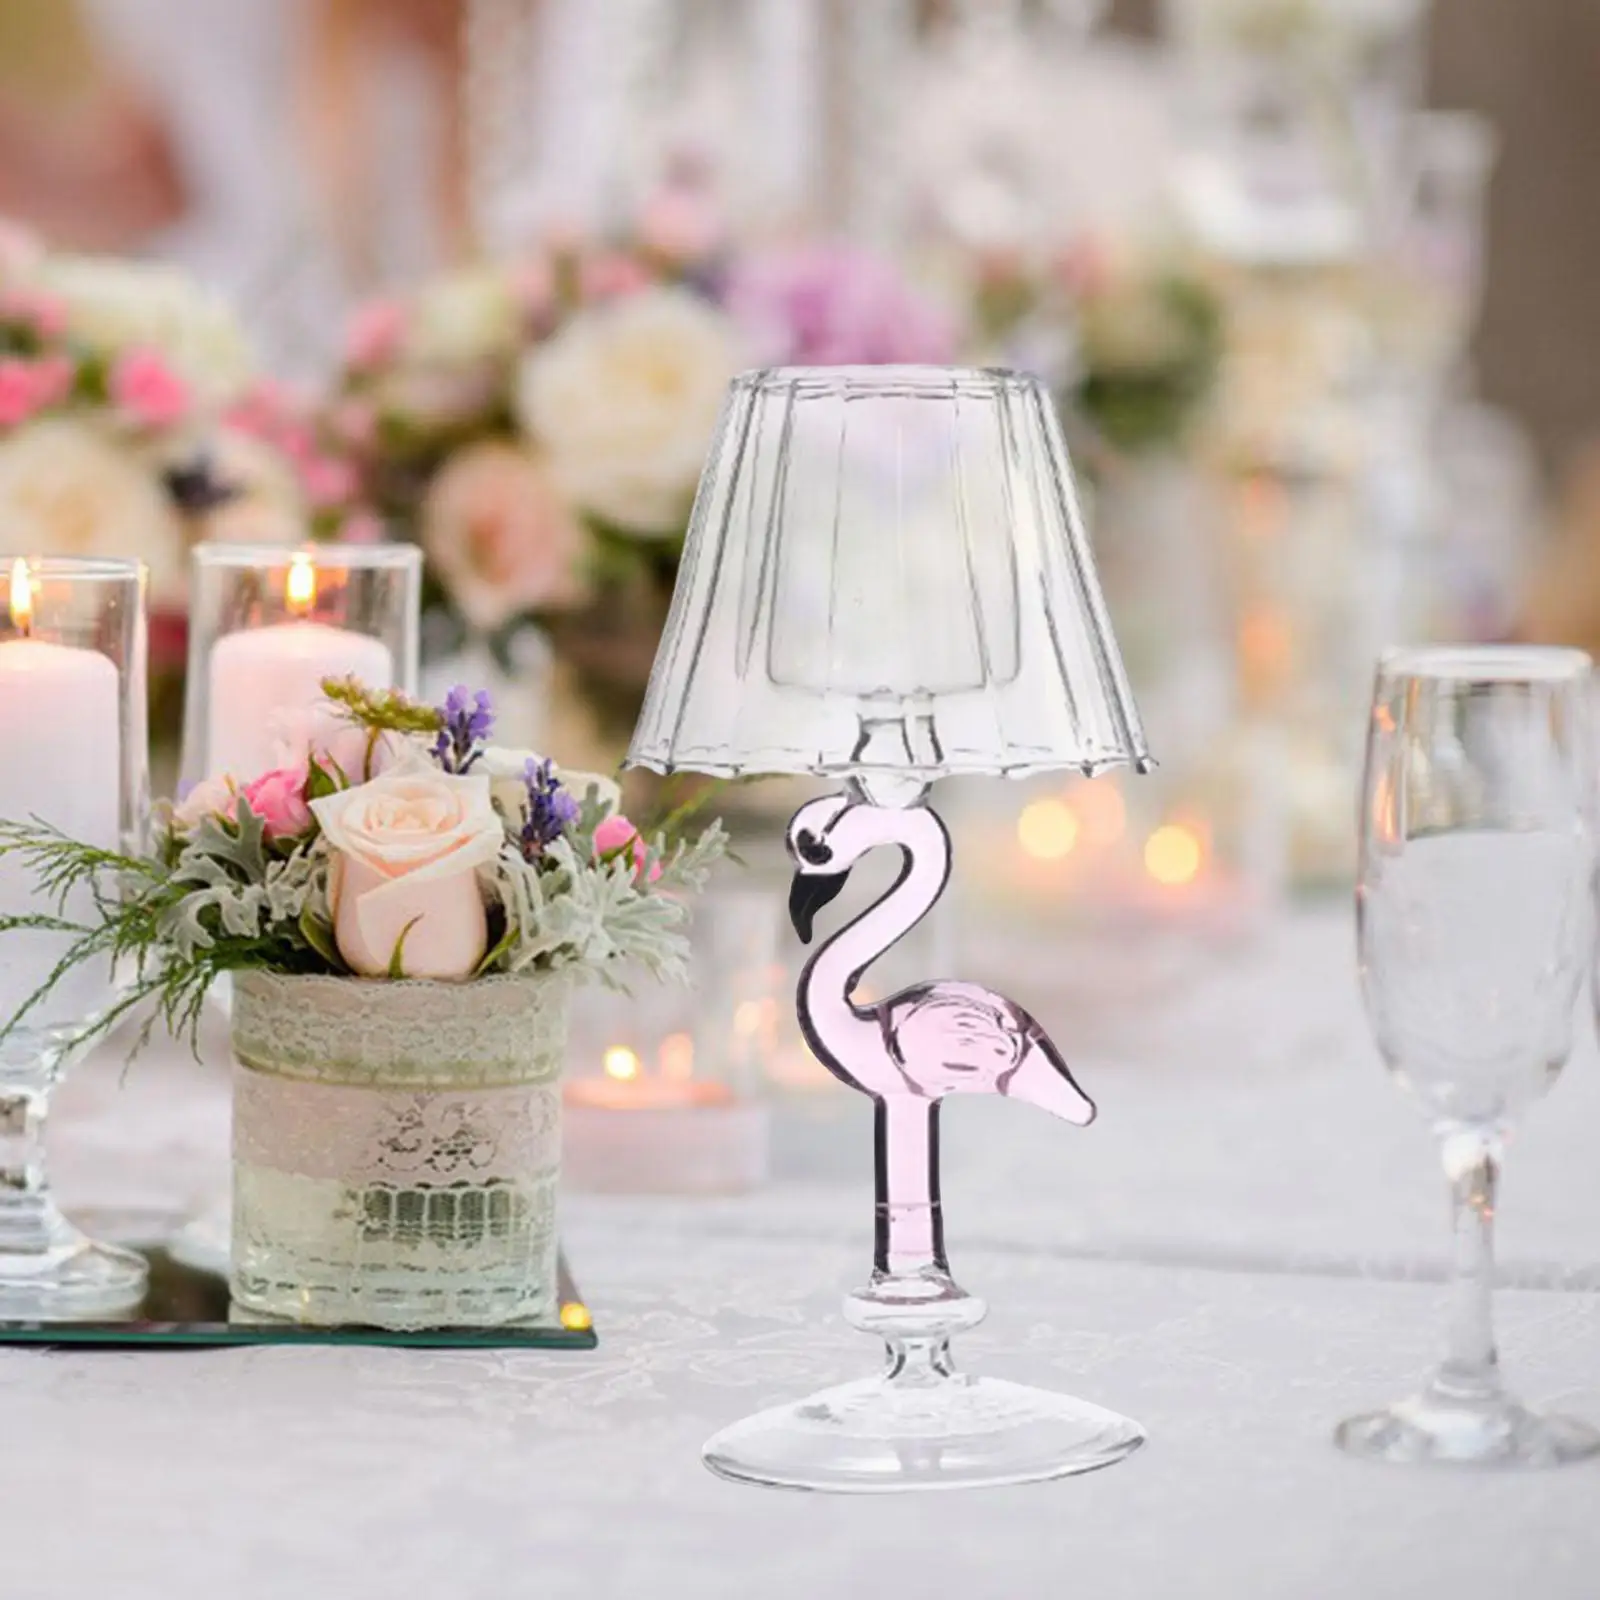 Creative Candle Holder, Stand Lamp Shape Pillar Candle Ornament Decor Decoration Event Dinner